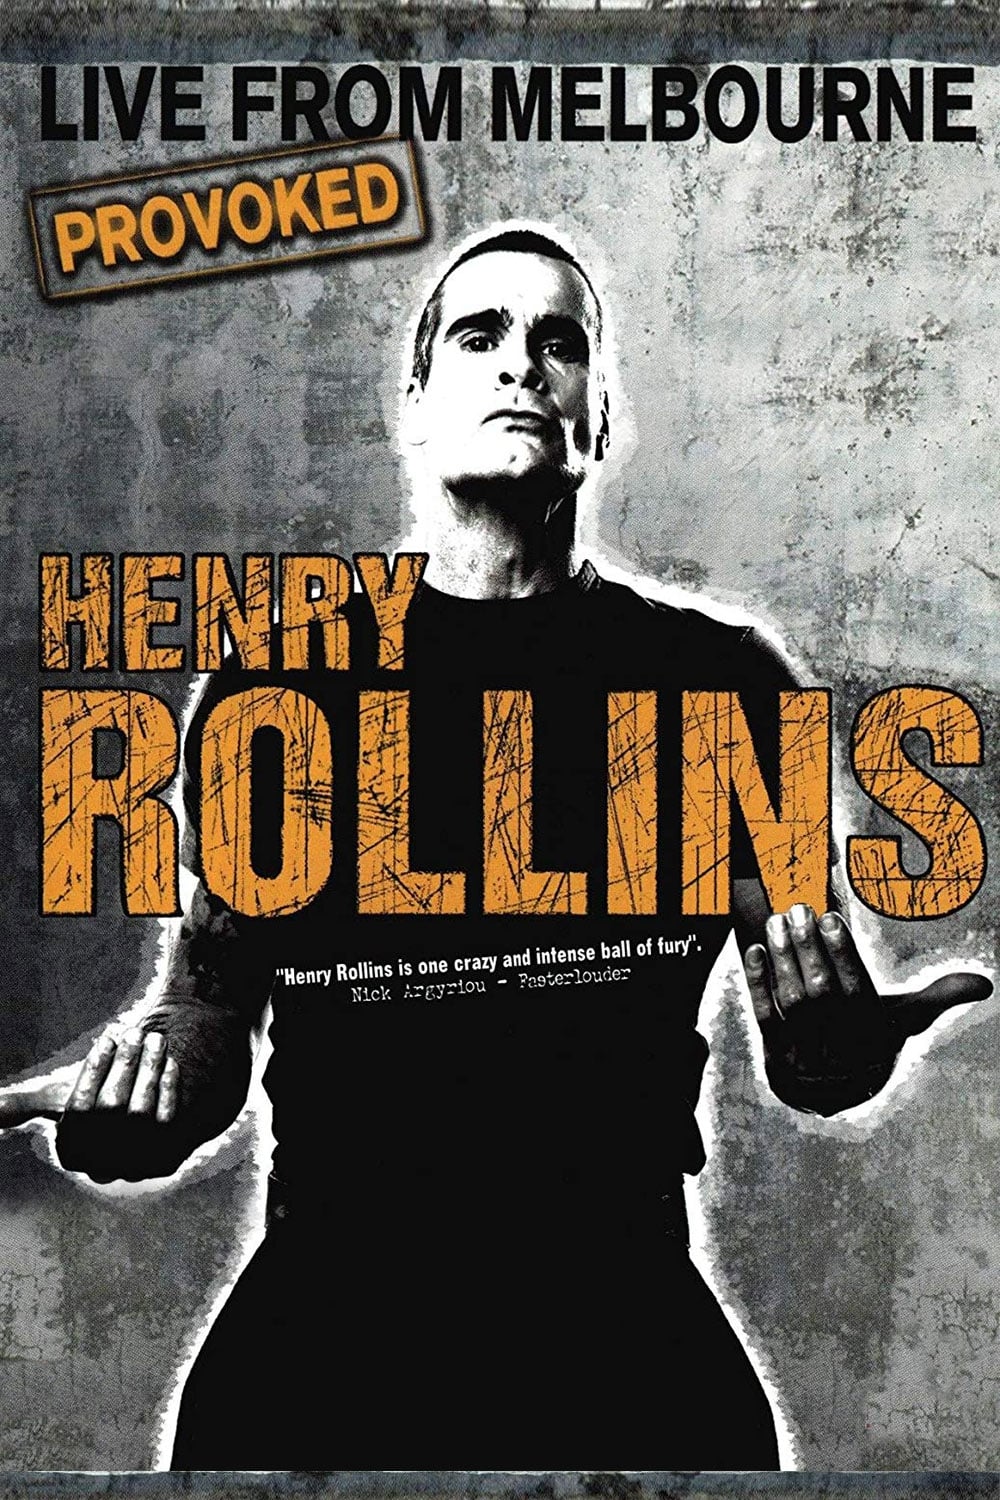 Henry Rollins Provoked: Live From Melbourne